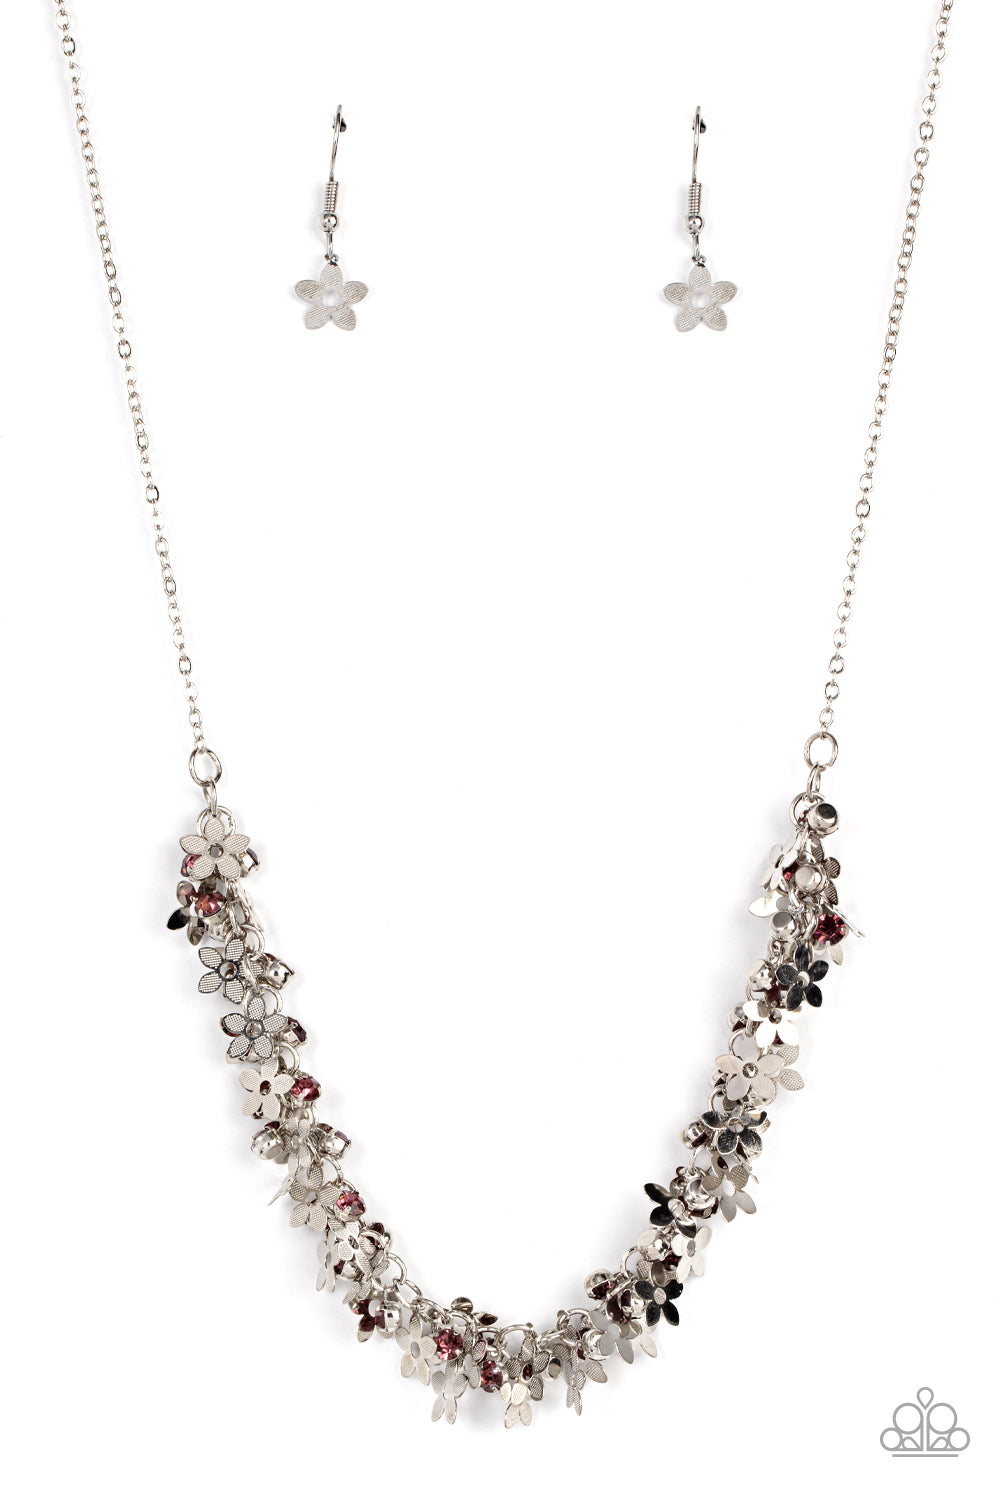 Fearlessly Floral - purple - Paparazzi necklace